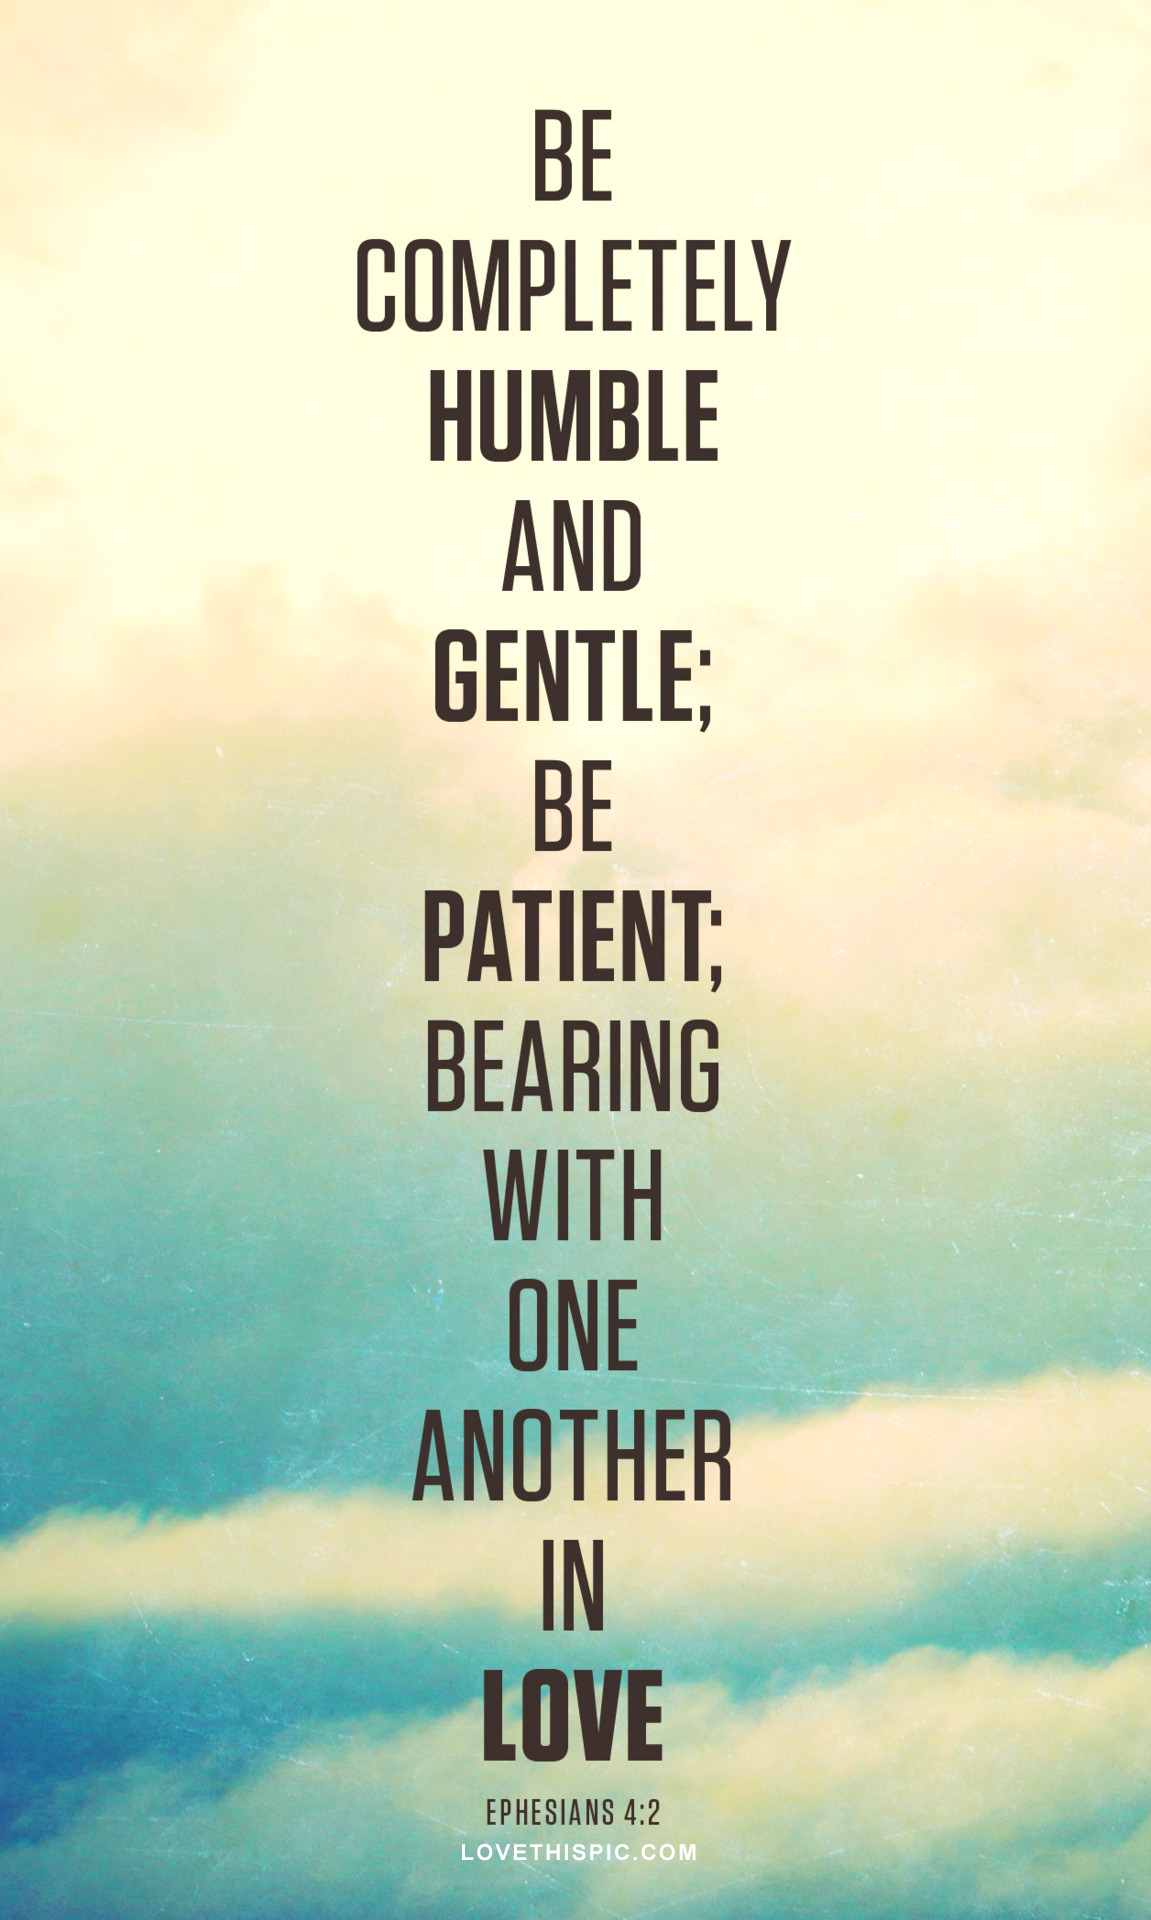 Christian Quotes On Being Humble. QuotesGram